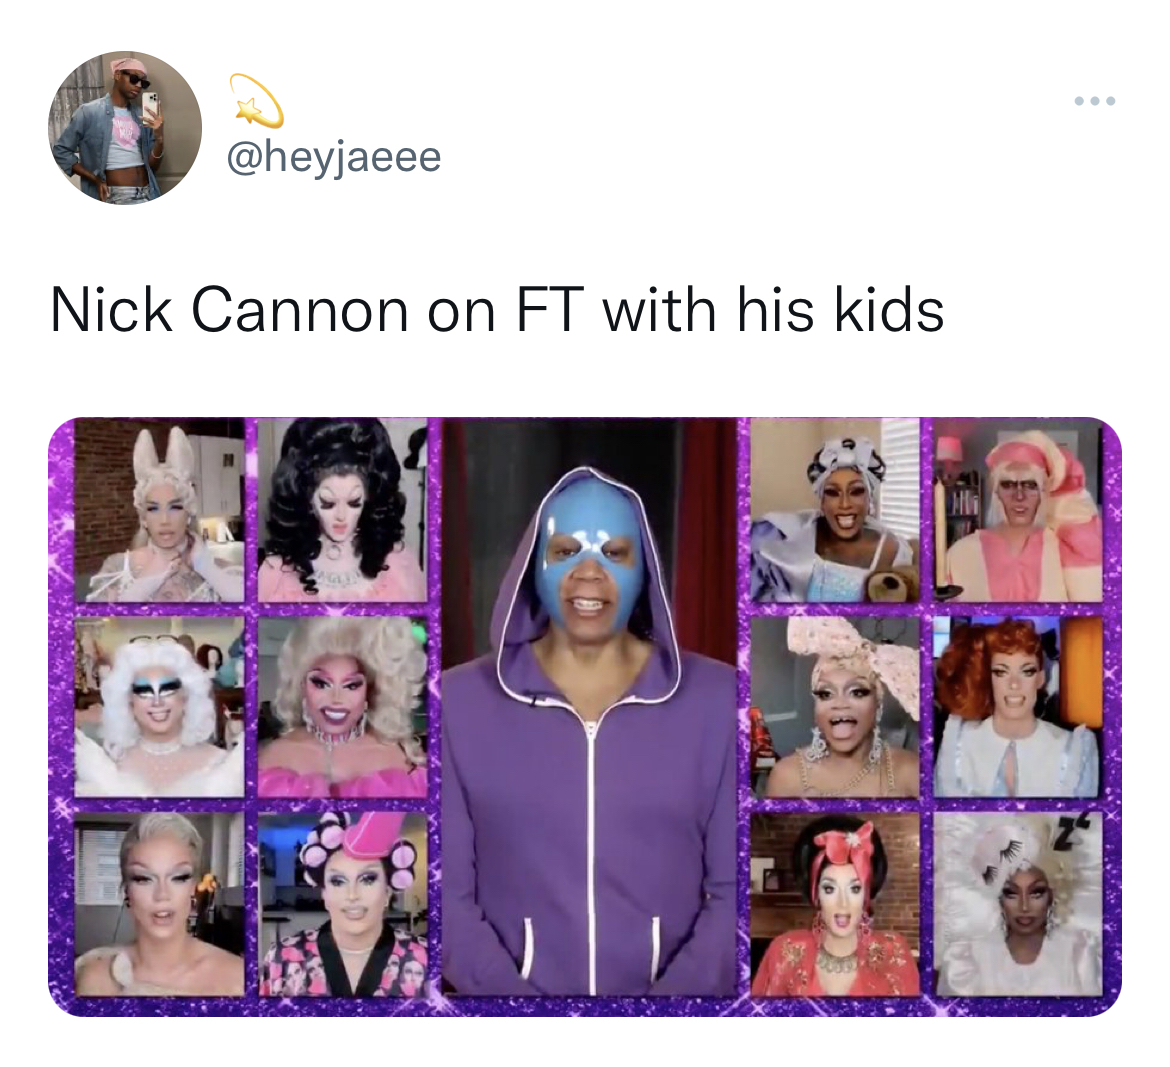 tweets roasting celebs - collage - Nick Cannon on Ft with his kids